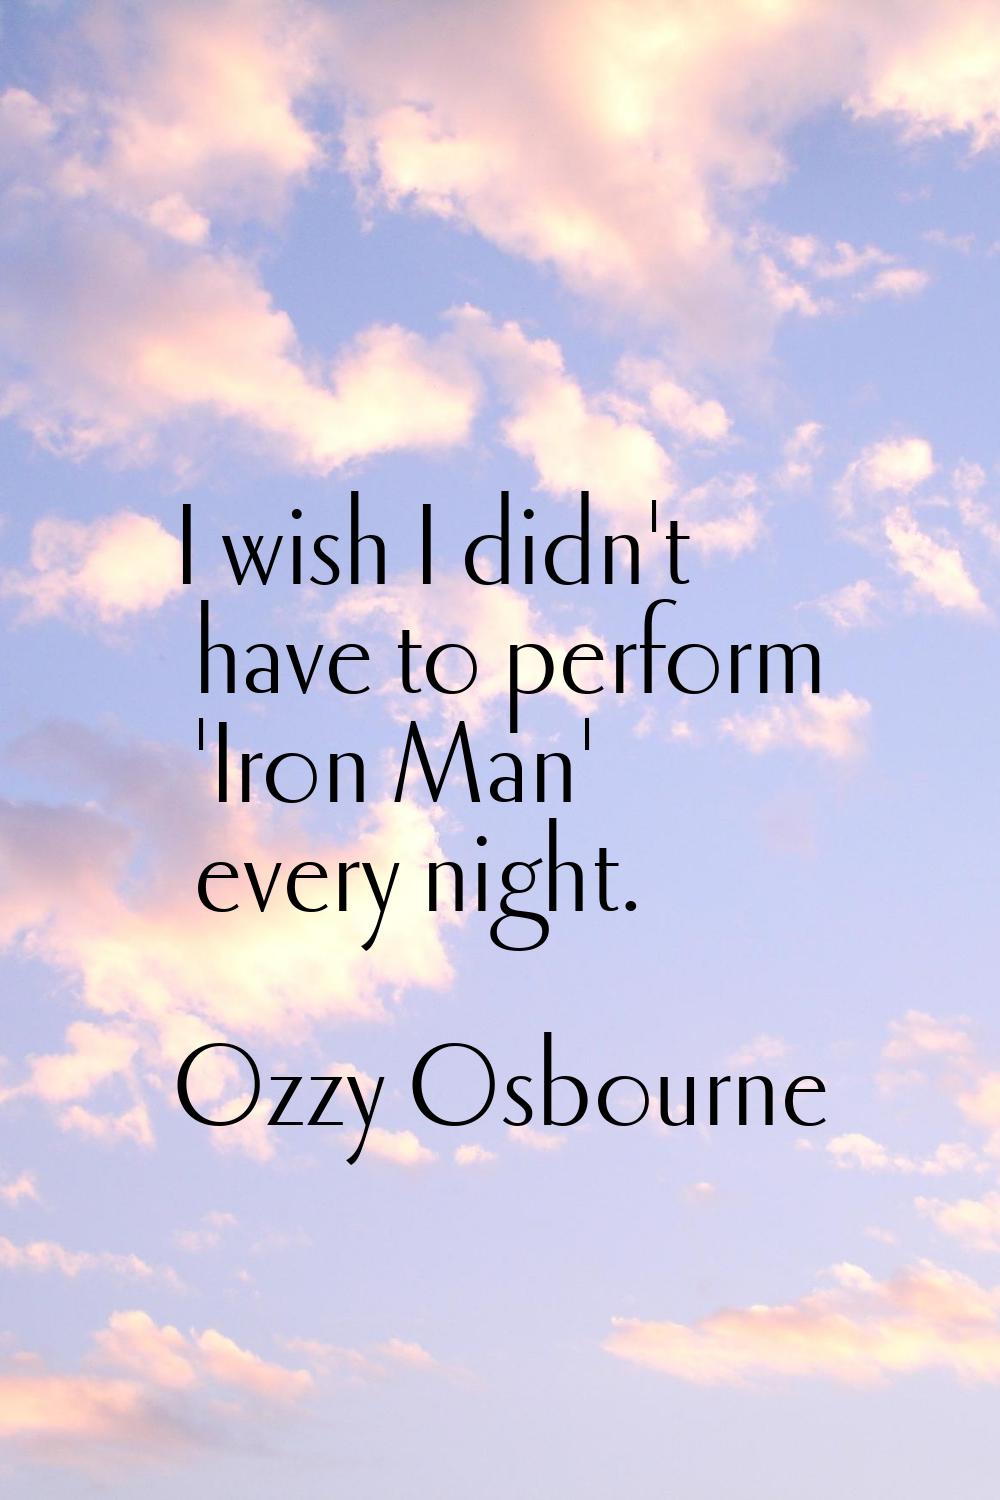 I wish I didn't have to perform 'Iron Man' every night.